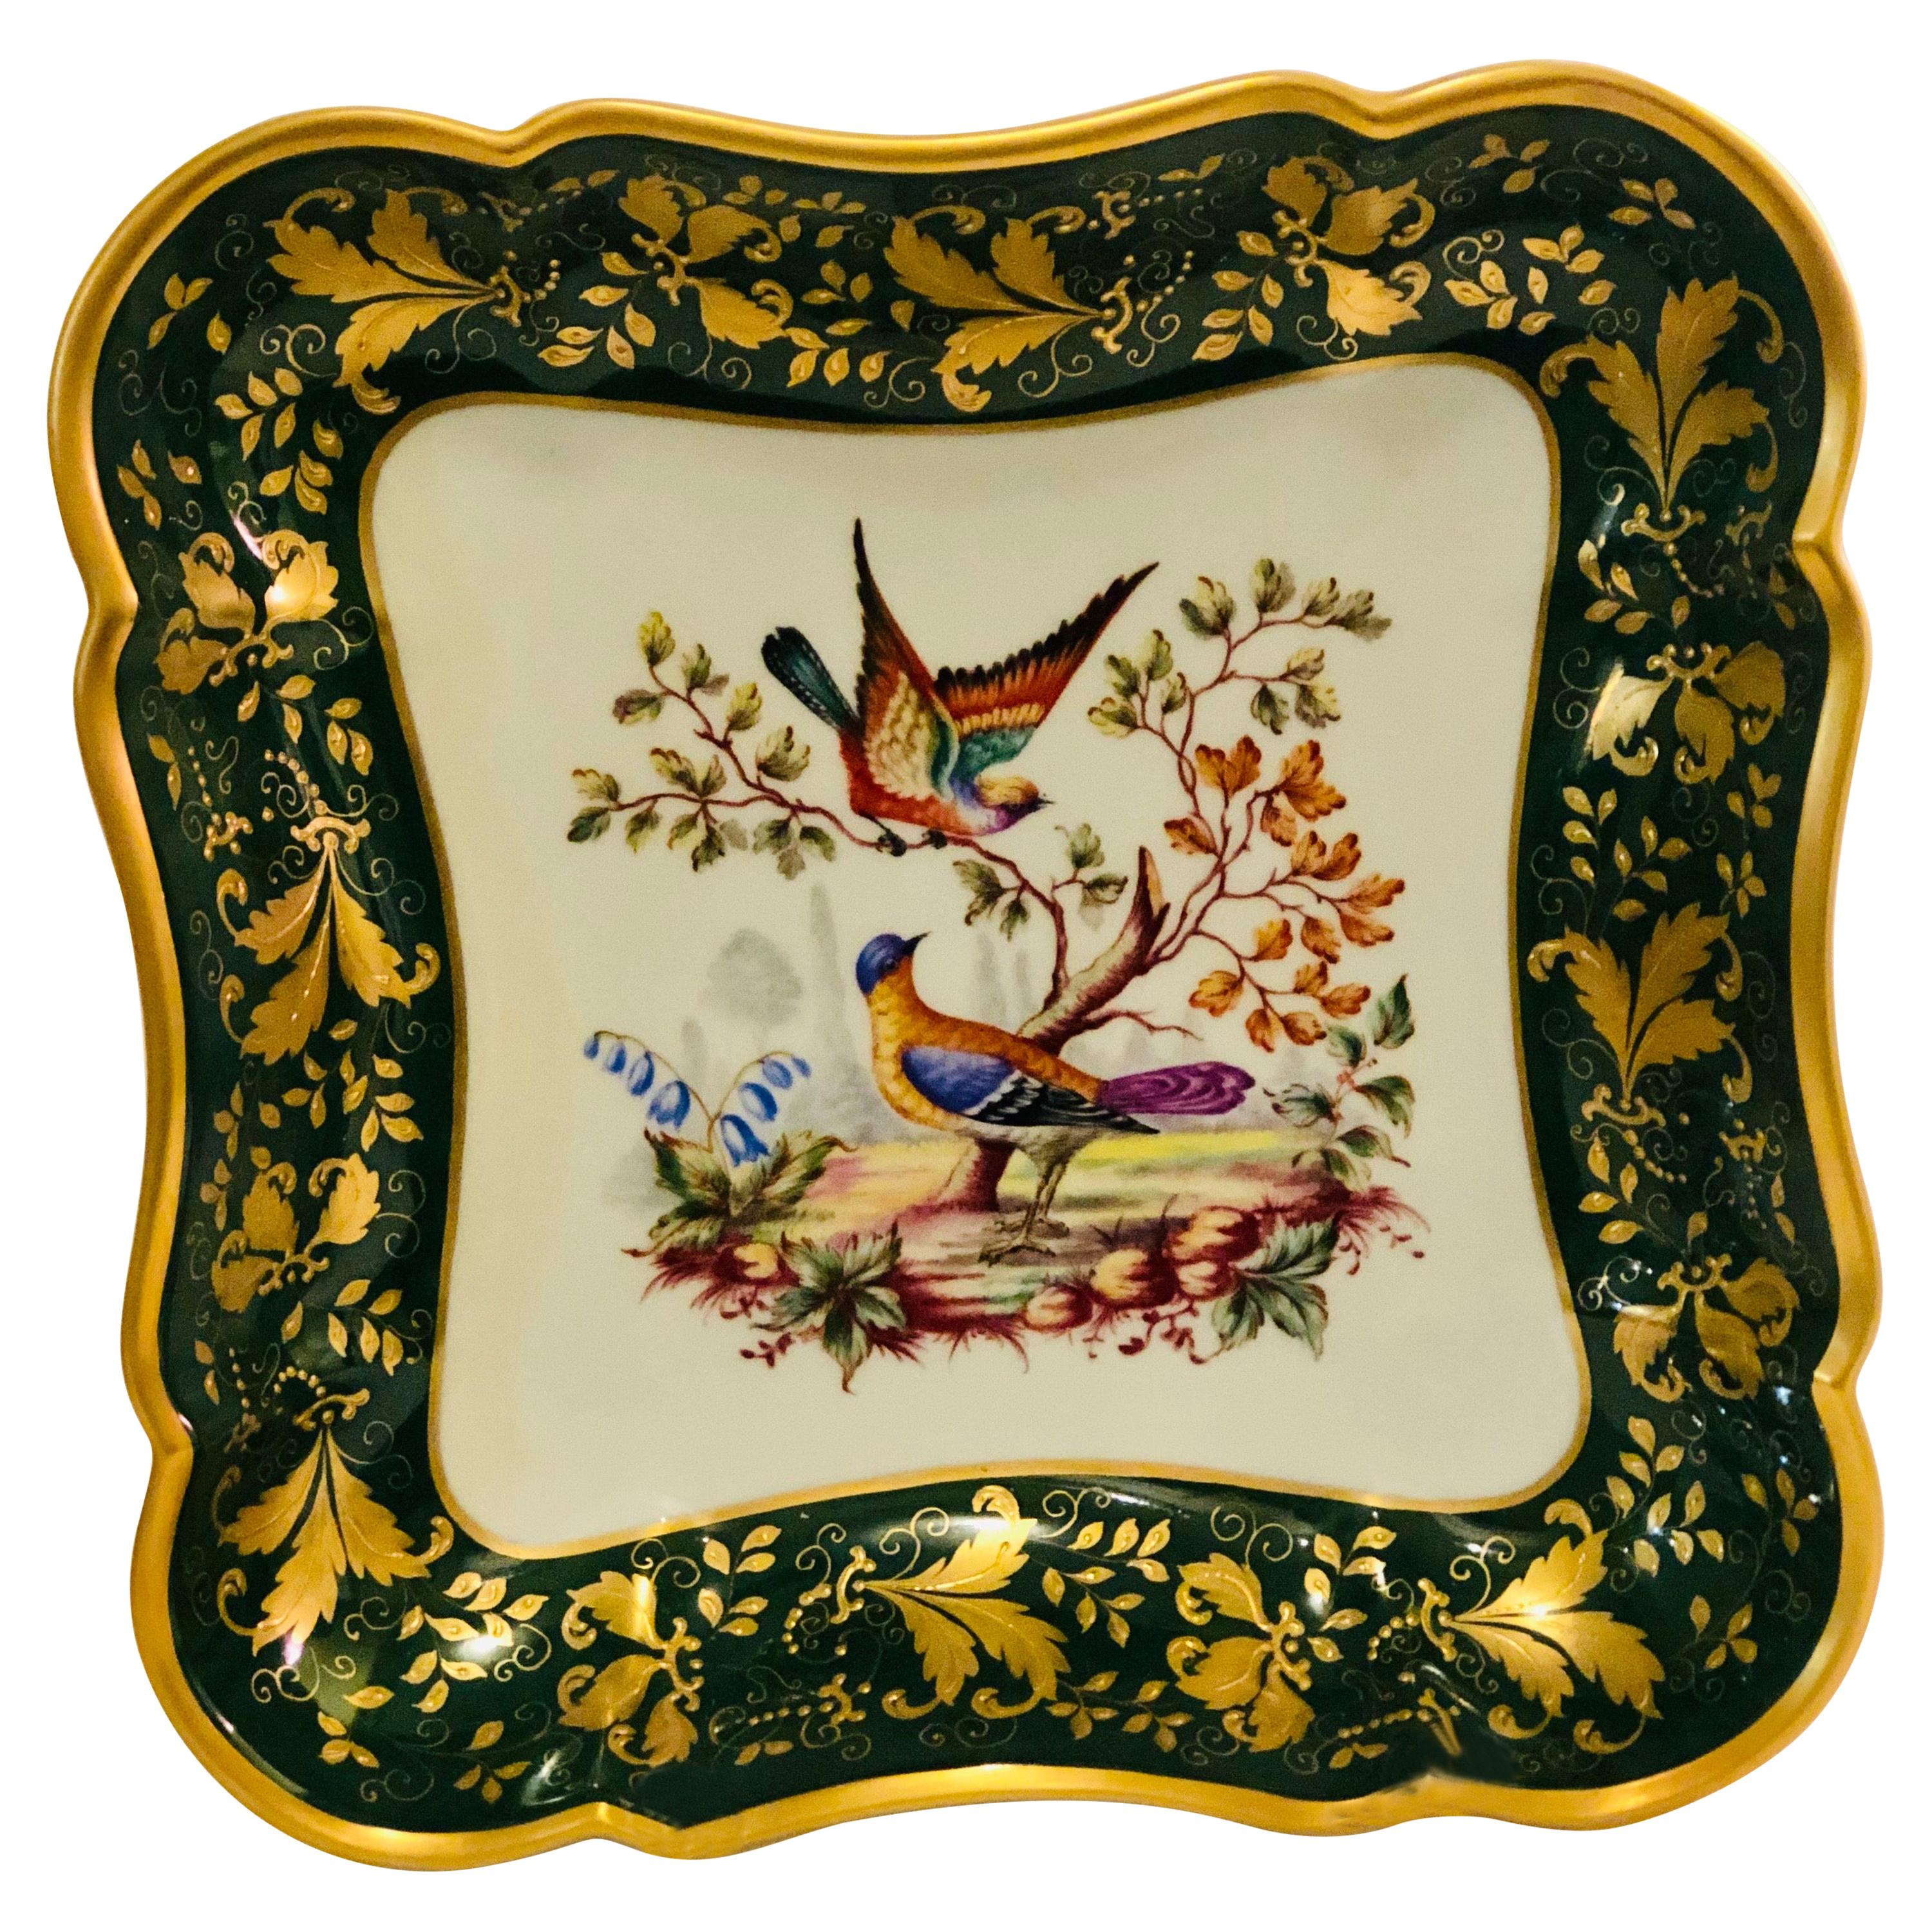 Le Tallec Green Bowl Painted with Colorful Birds with a Raised Gold Border